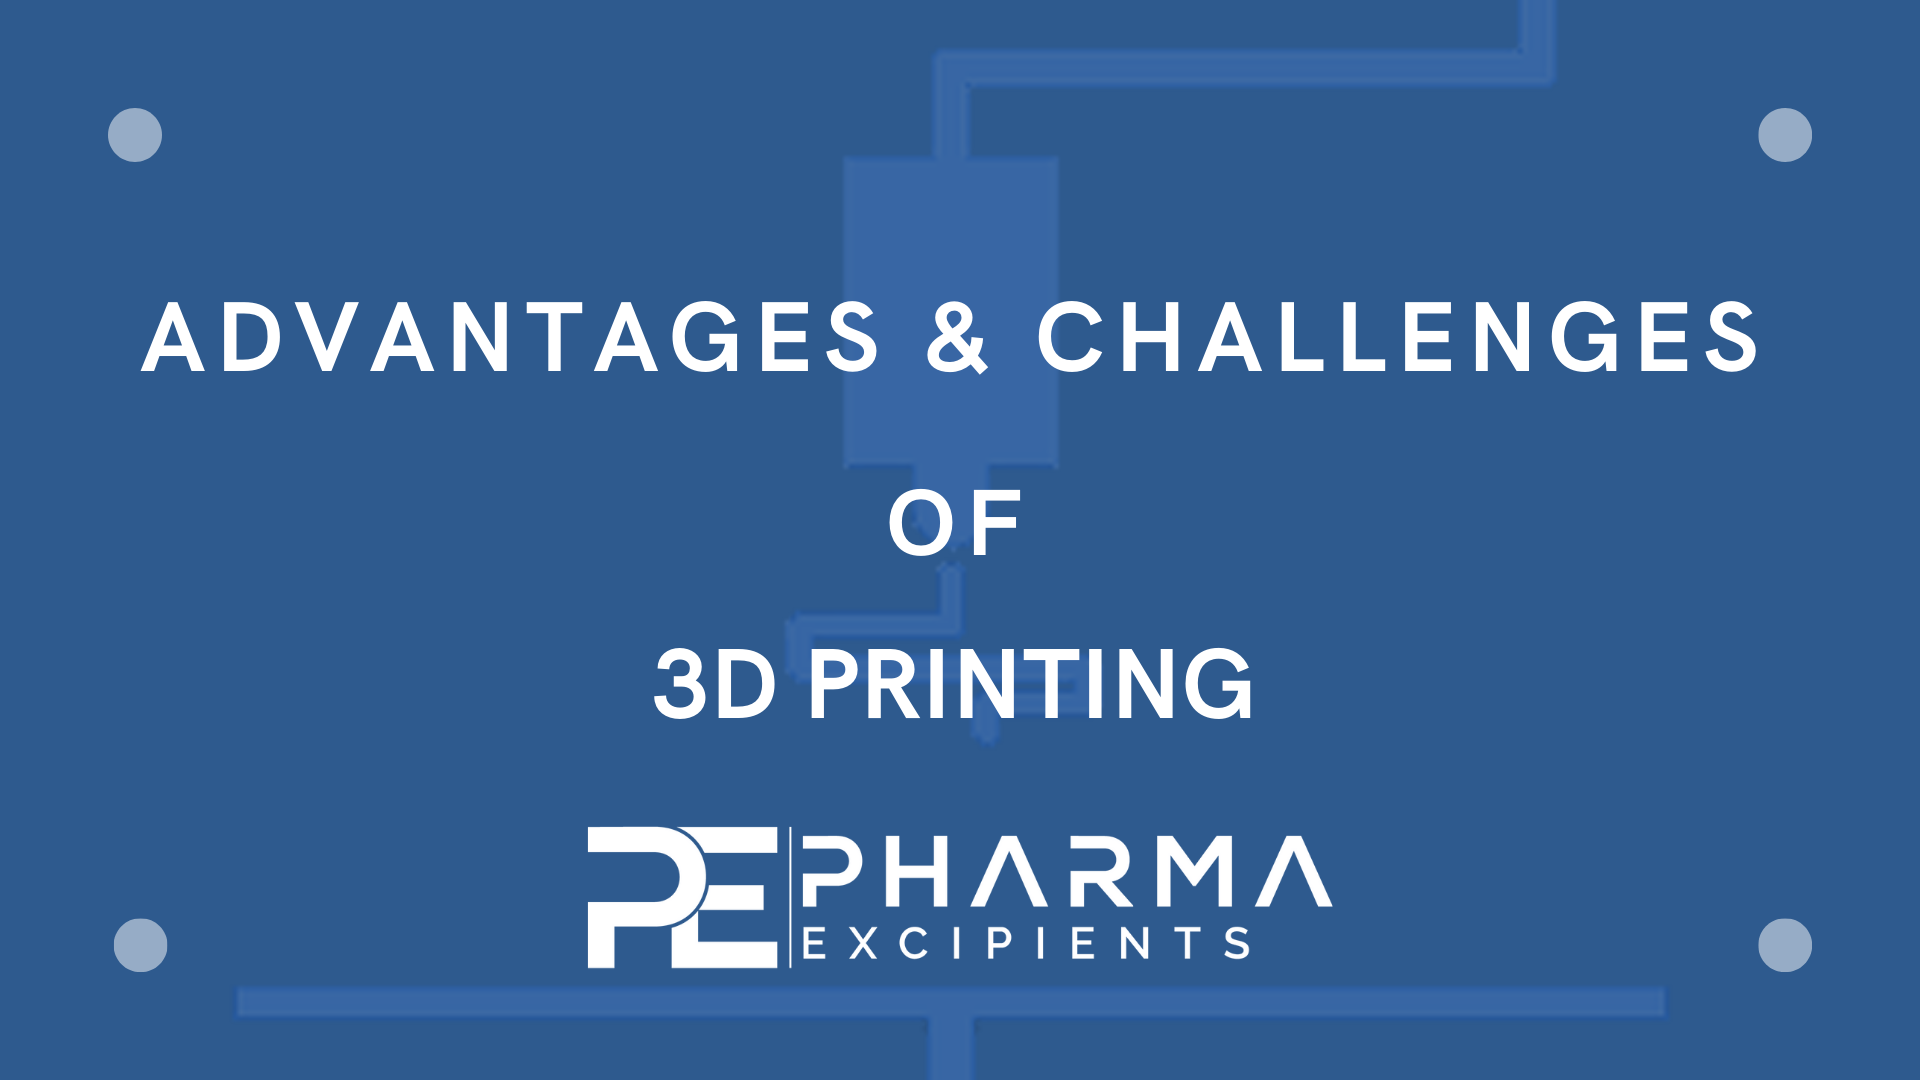 Advantages and challenges of pharmaceutical 3D printing